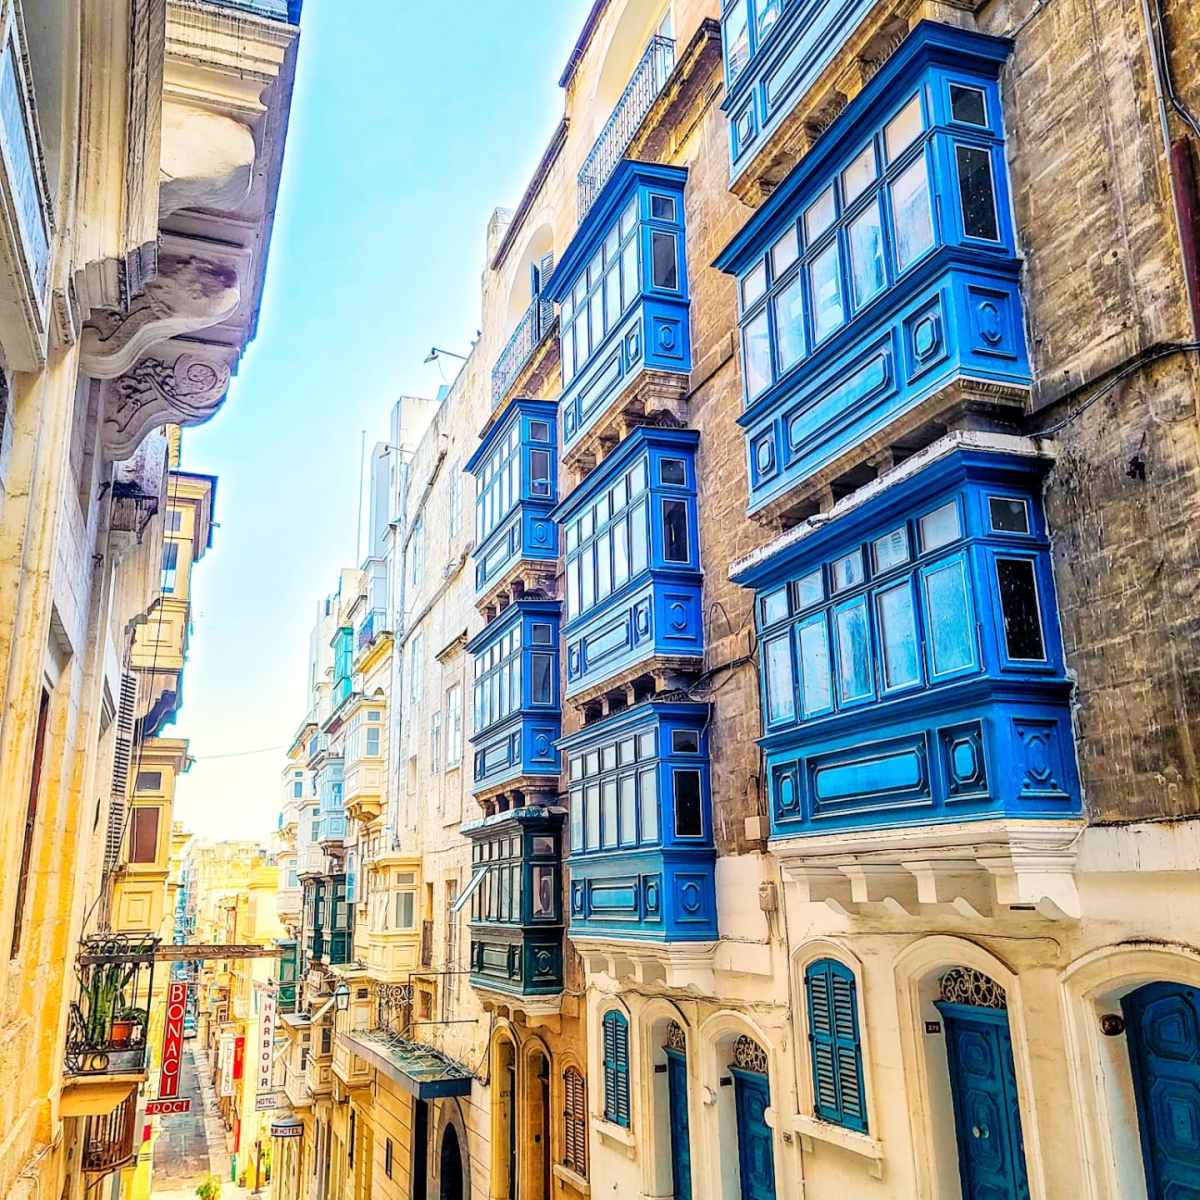 40 Things to See & Do in Malta + Travel Guide